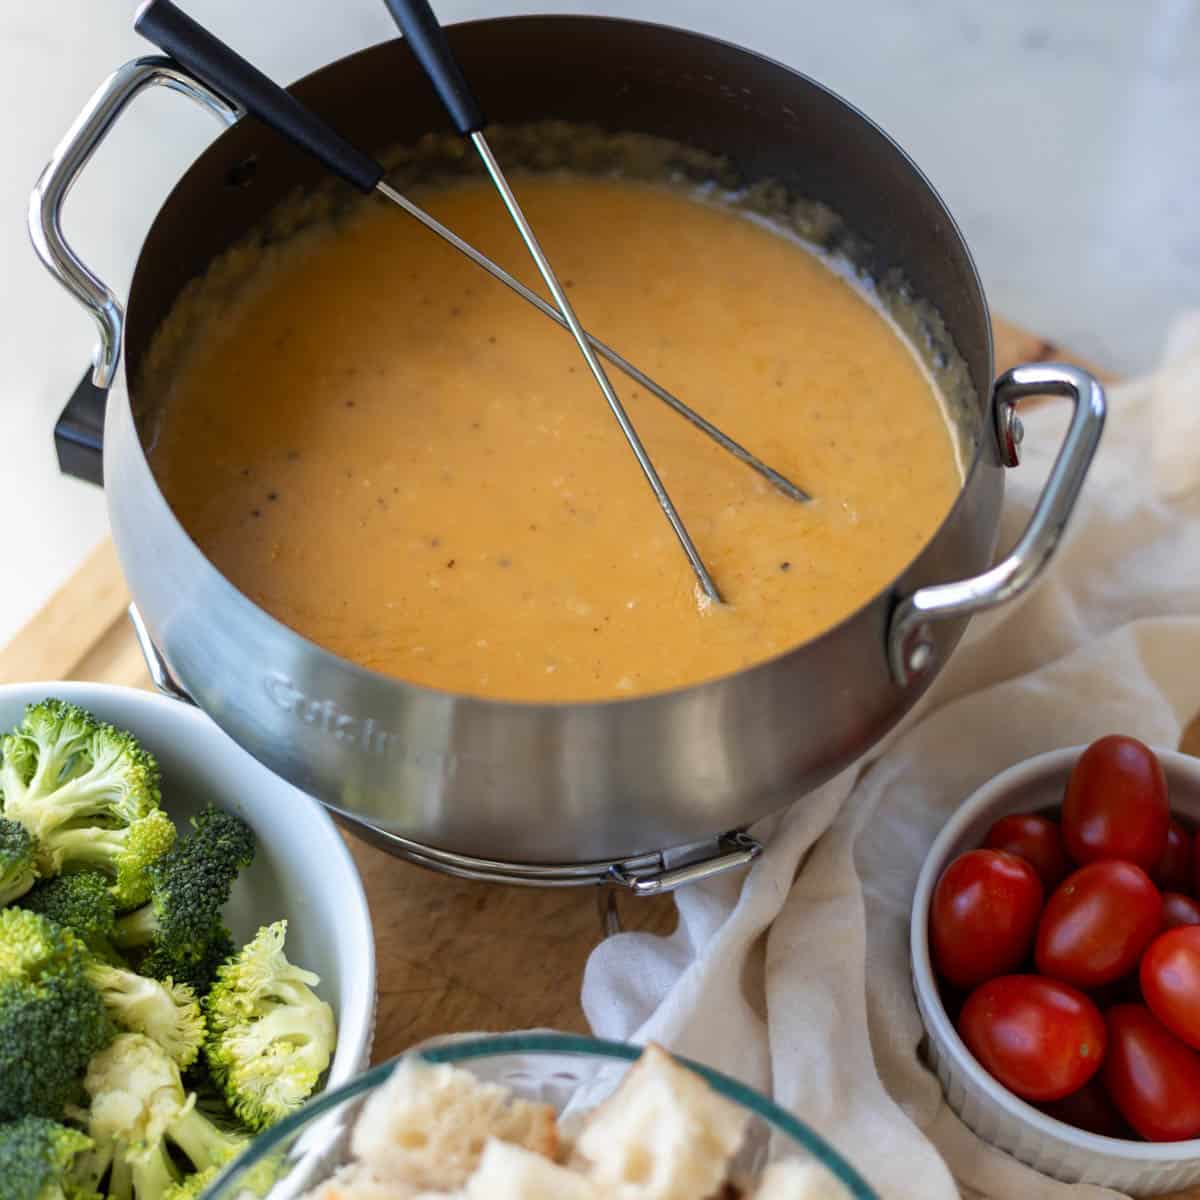 cheese fondue in a bot with skewers next to broccoli, bread, and tomatoes